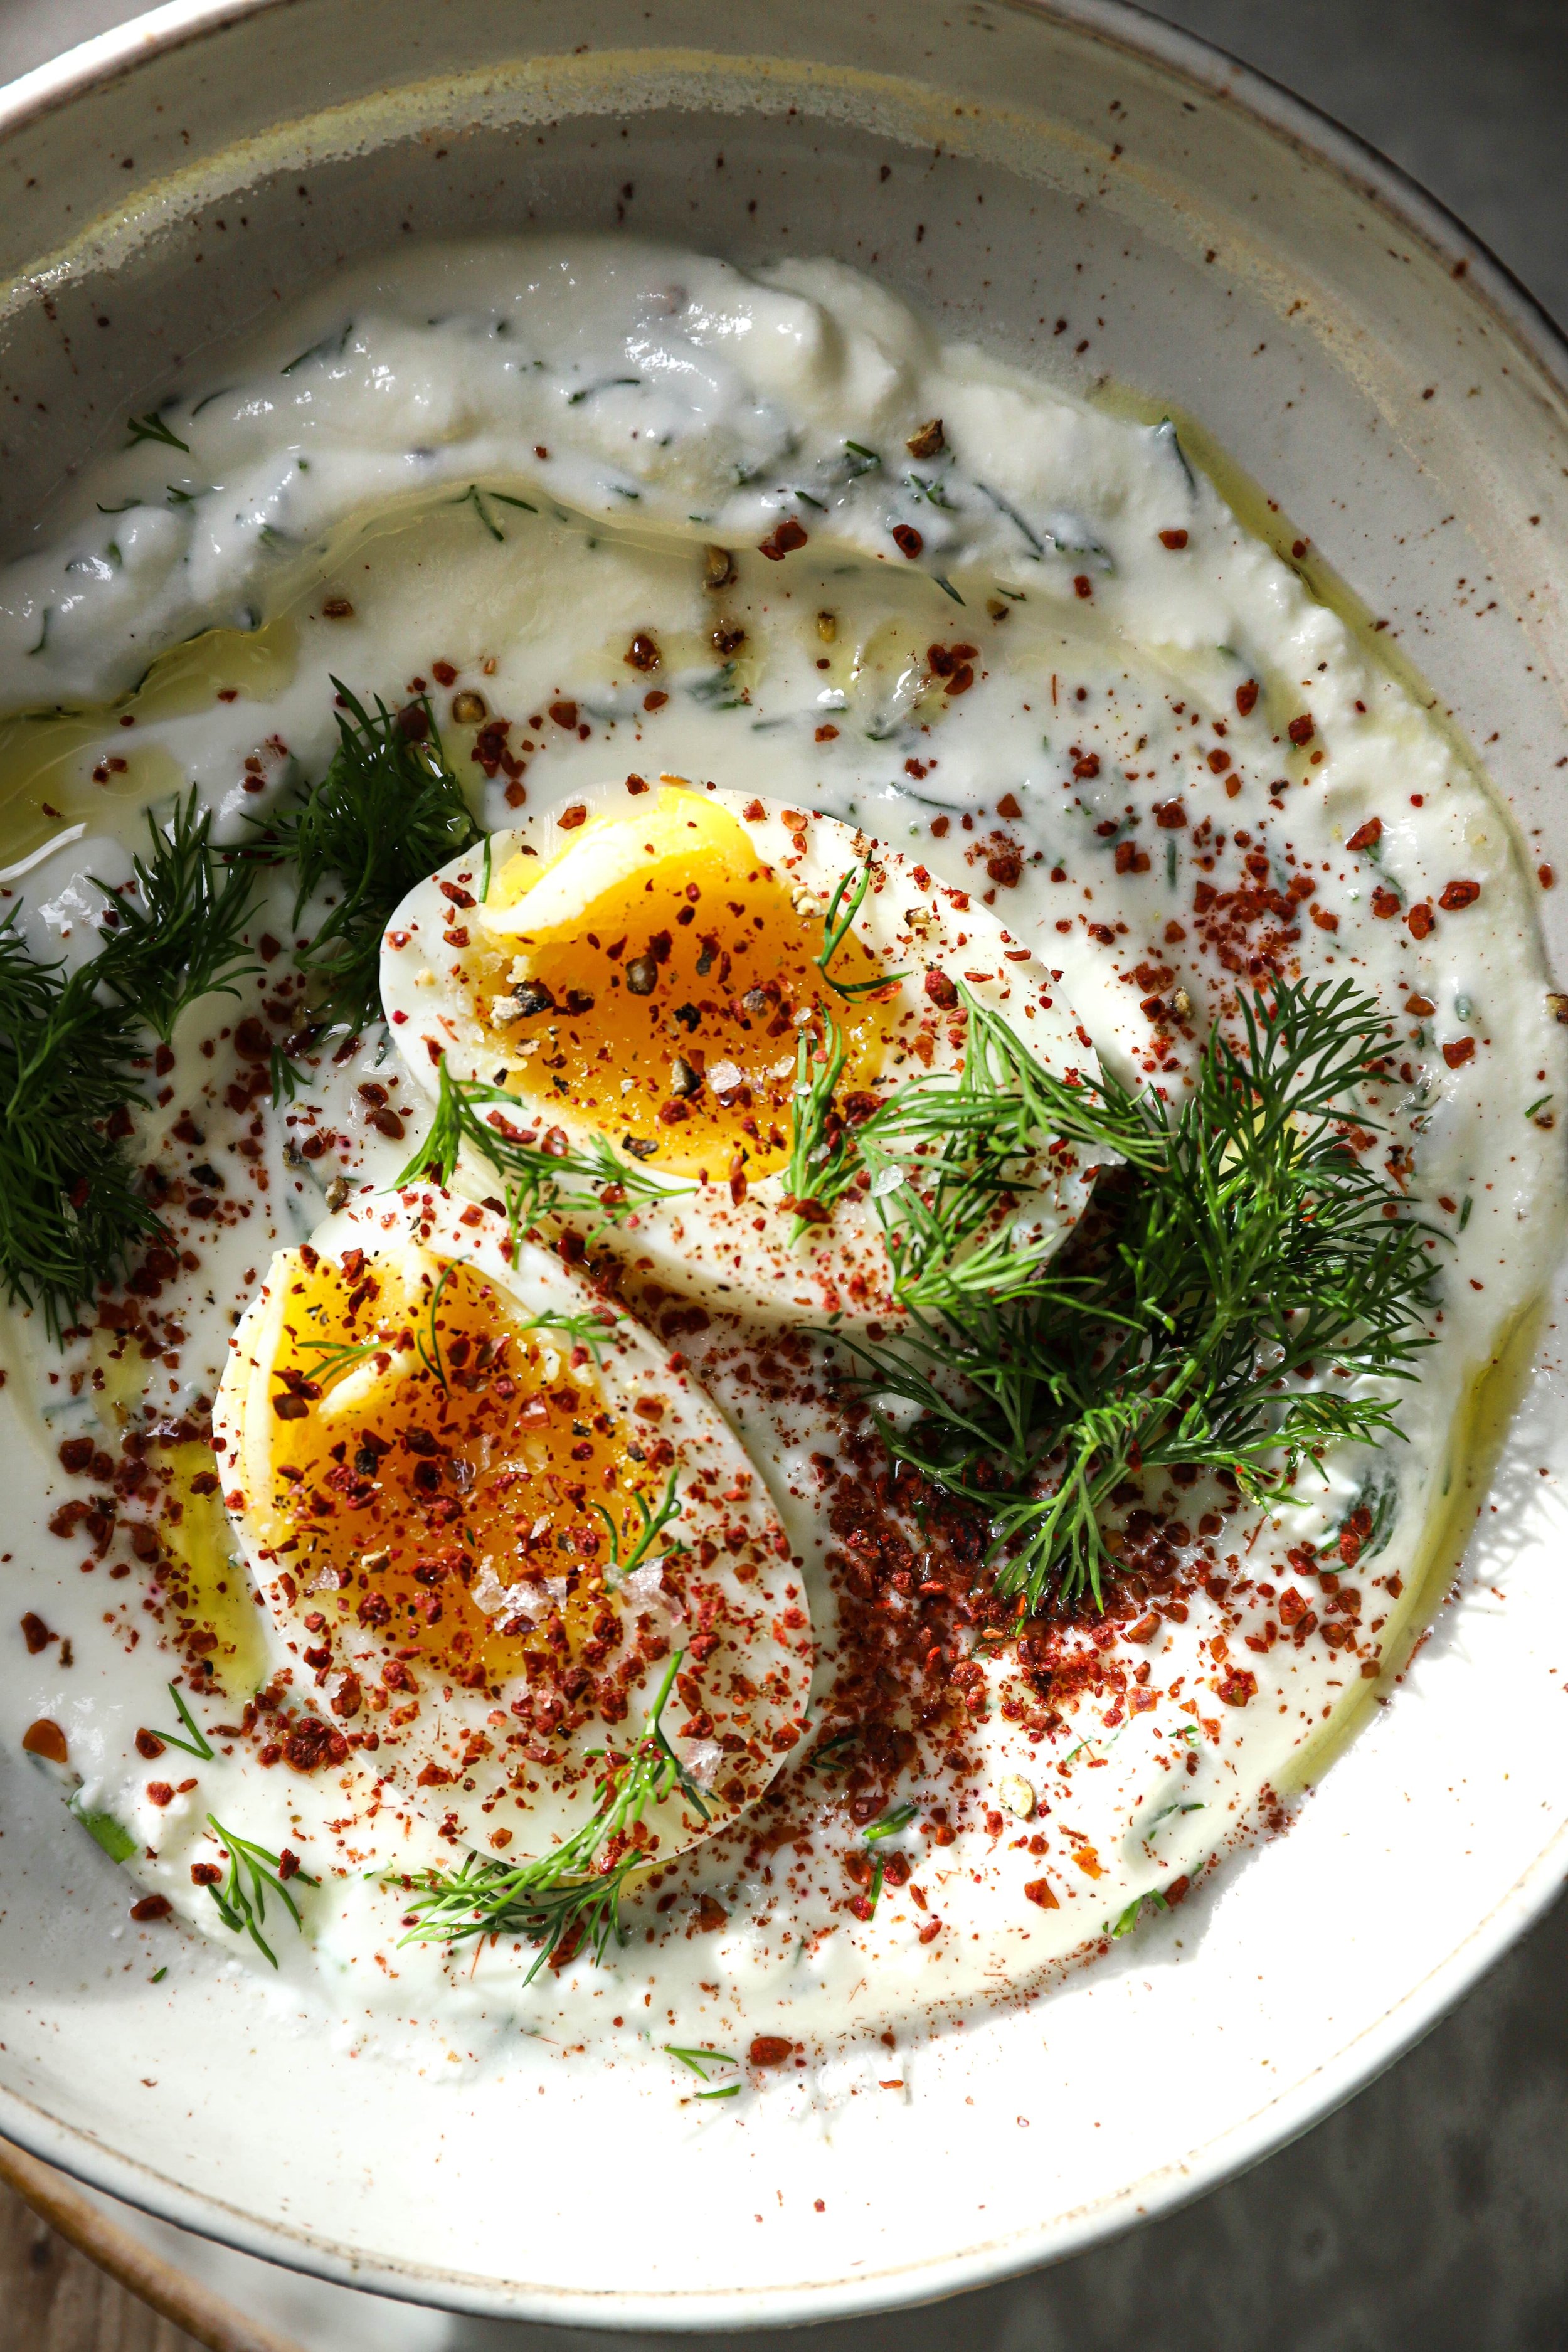 Soft-boiled eggs with dippers - Recipes 